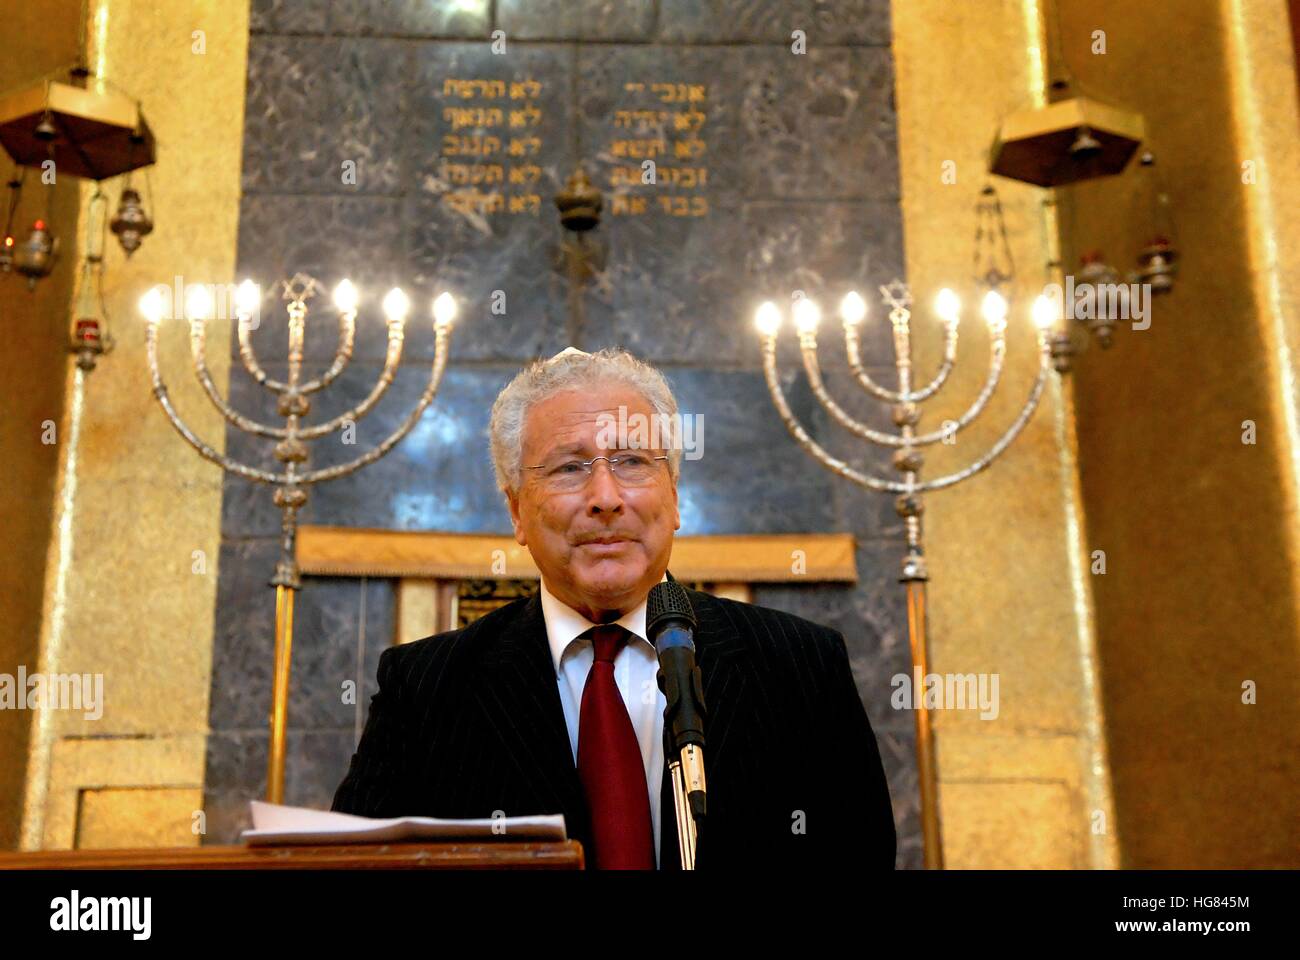 Central Synagogue in Milan (Italy), European Day of Jewish Culture,  Renzo Gattegna, President of Italian Jewish Communities Union Stock Photo